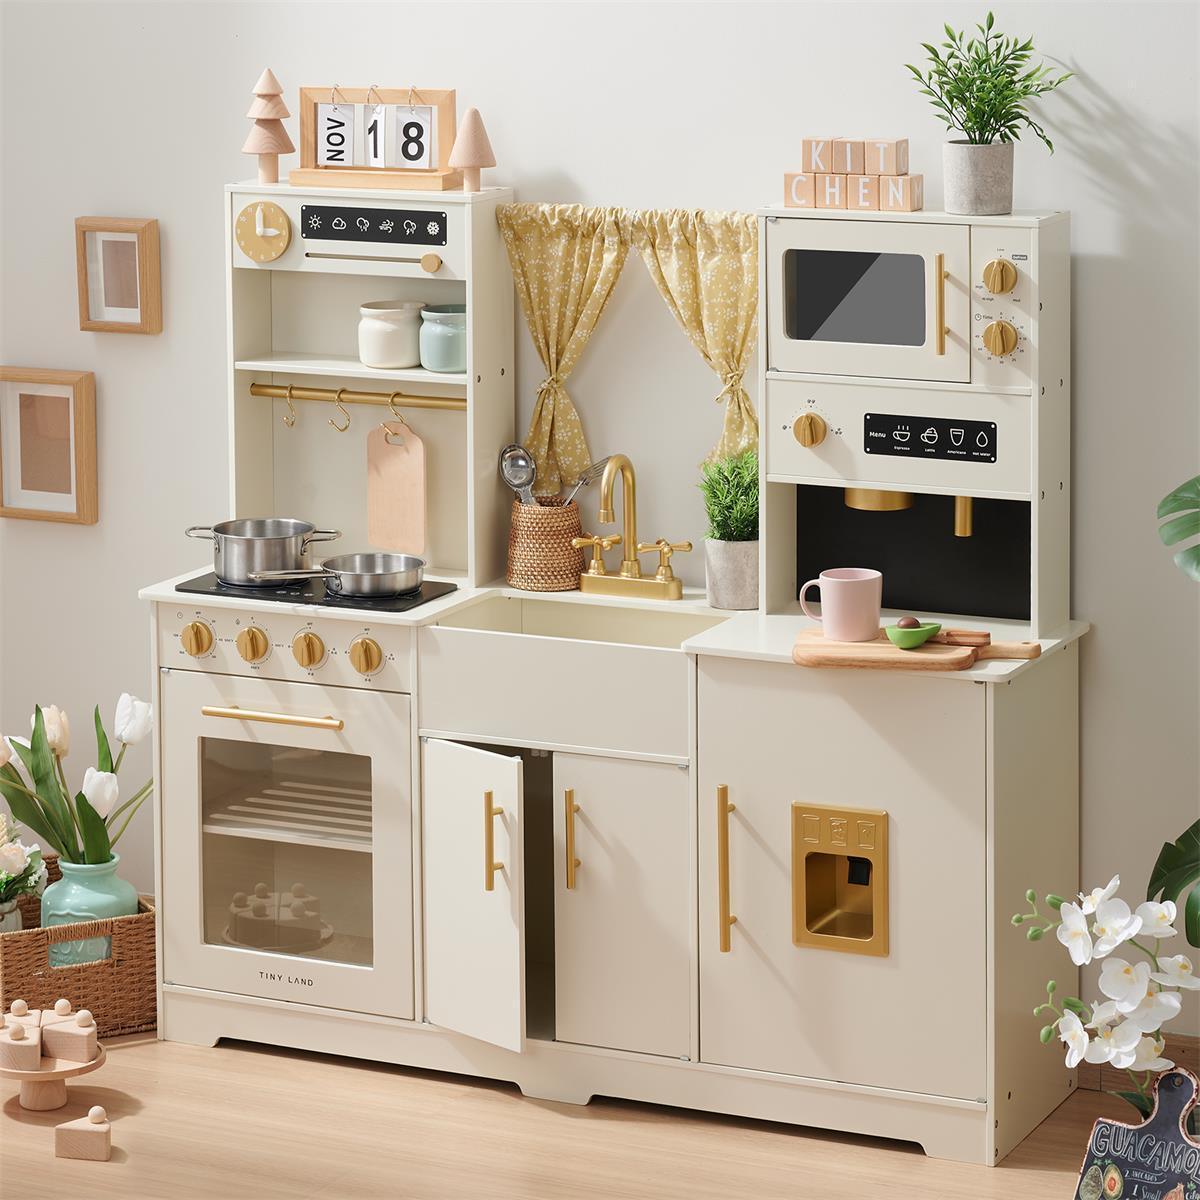 play kitchen for kids